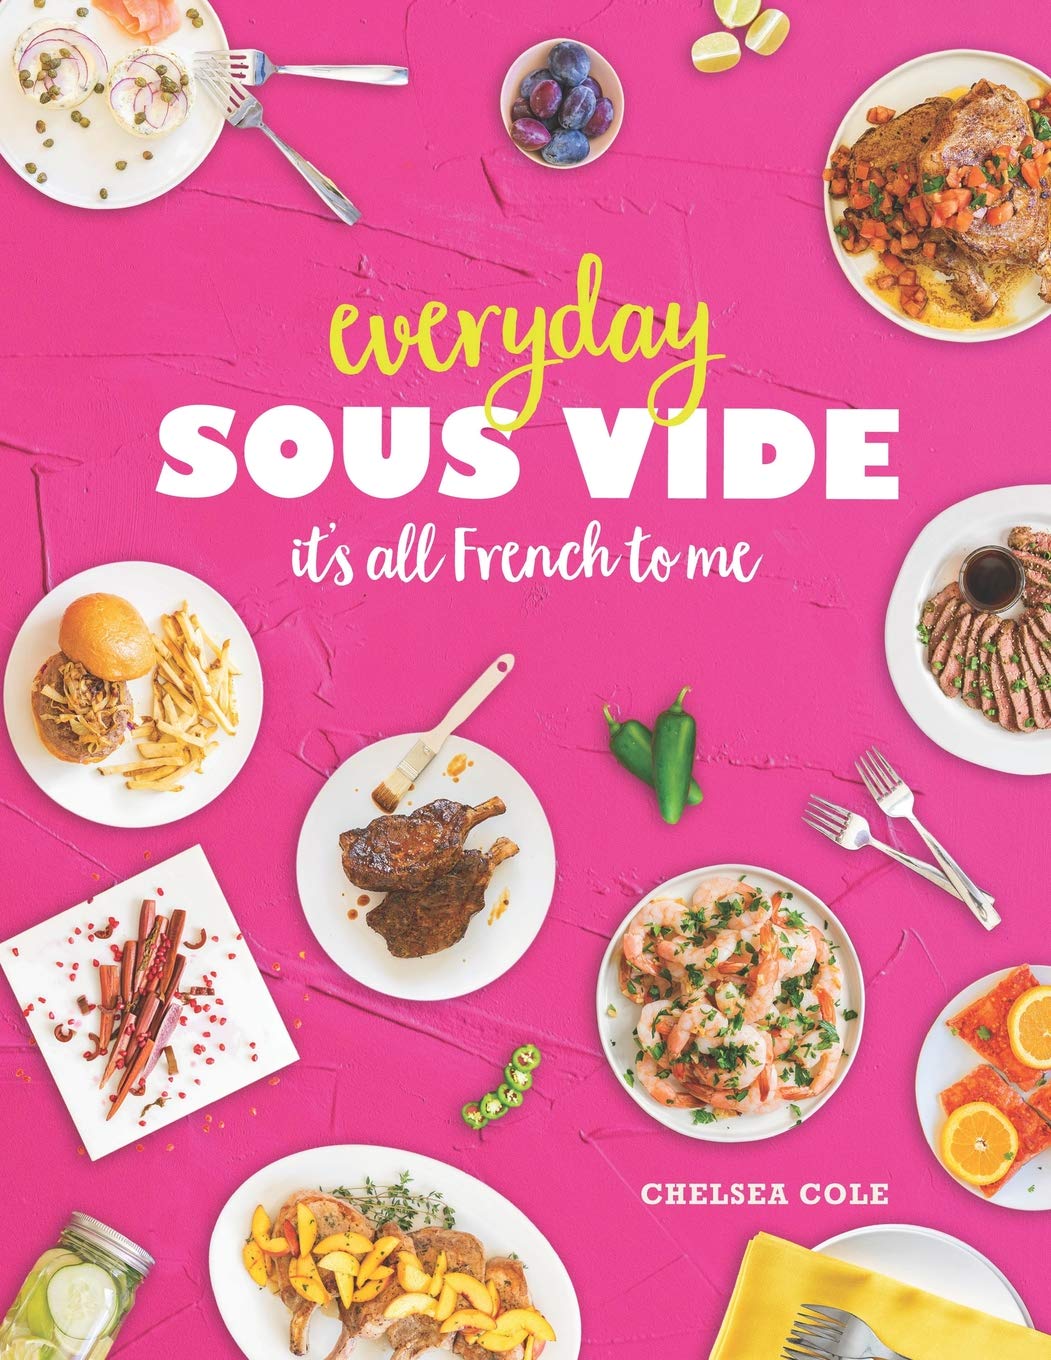 The front cover of the book - Everyday Sous Vide. - It's all French to Me.